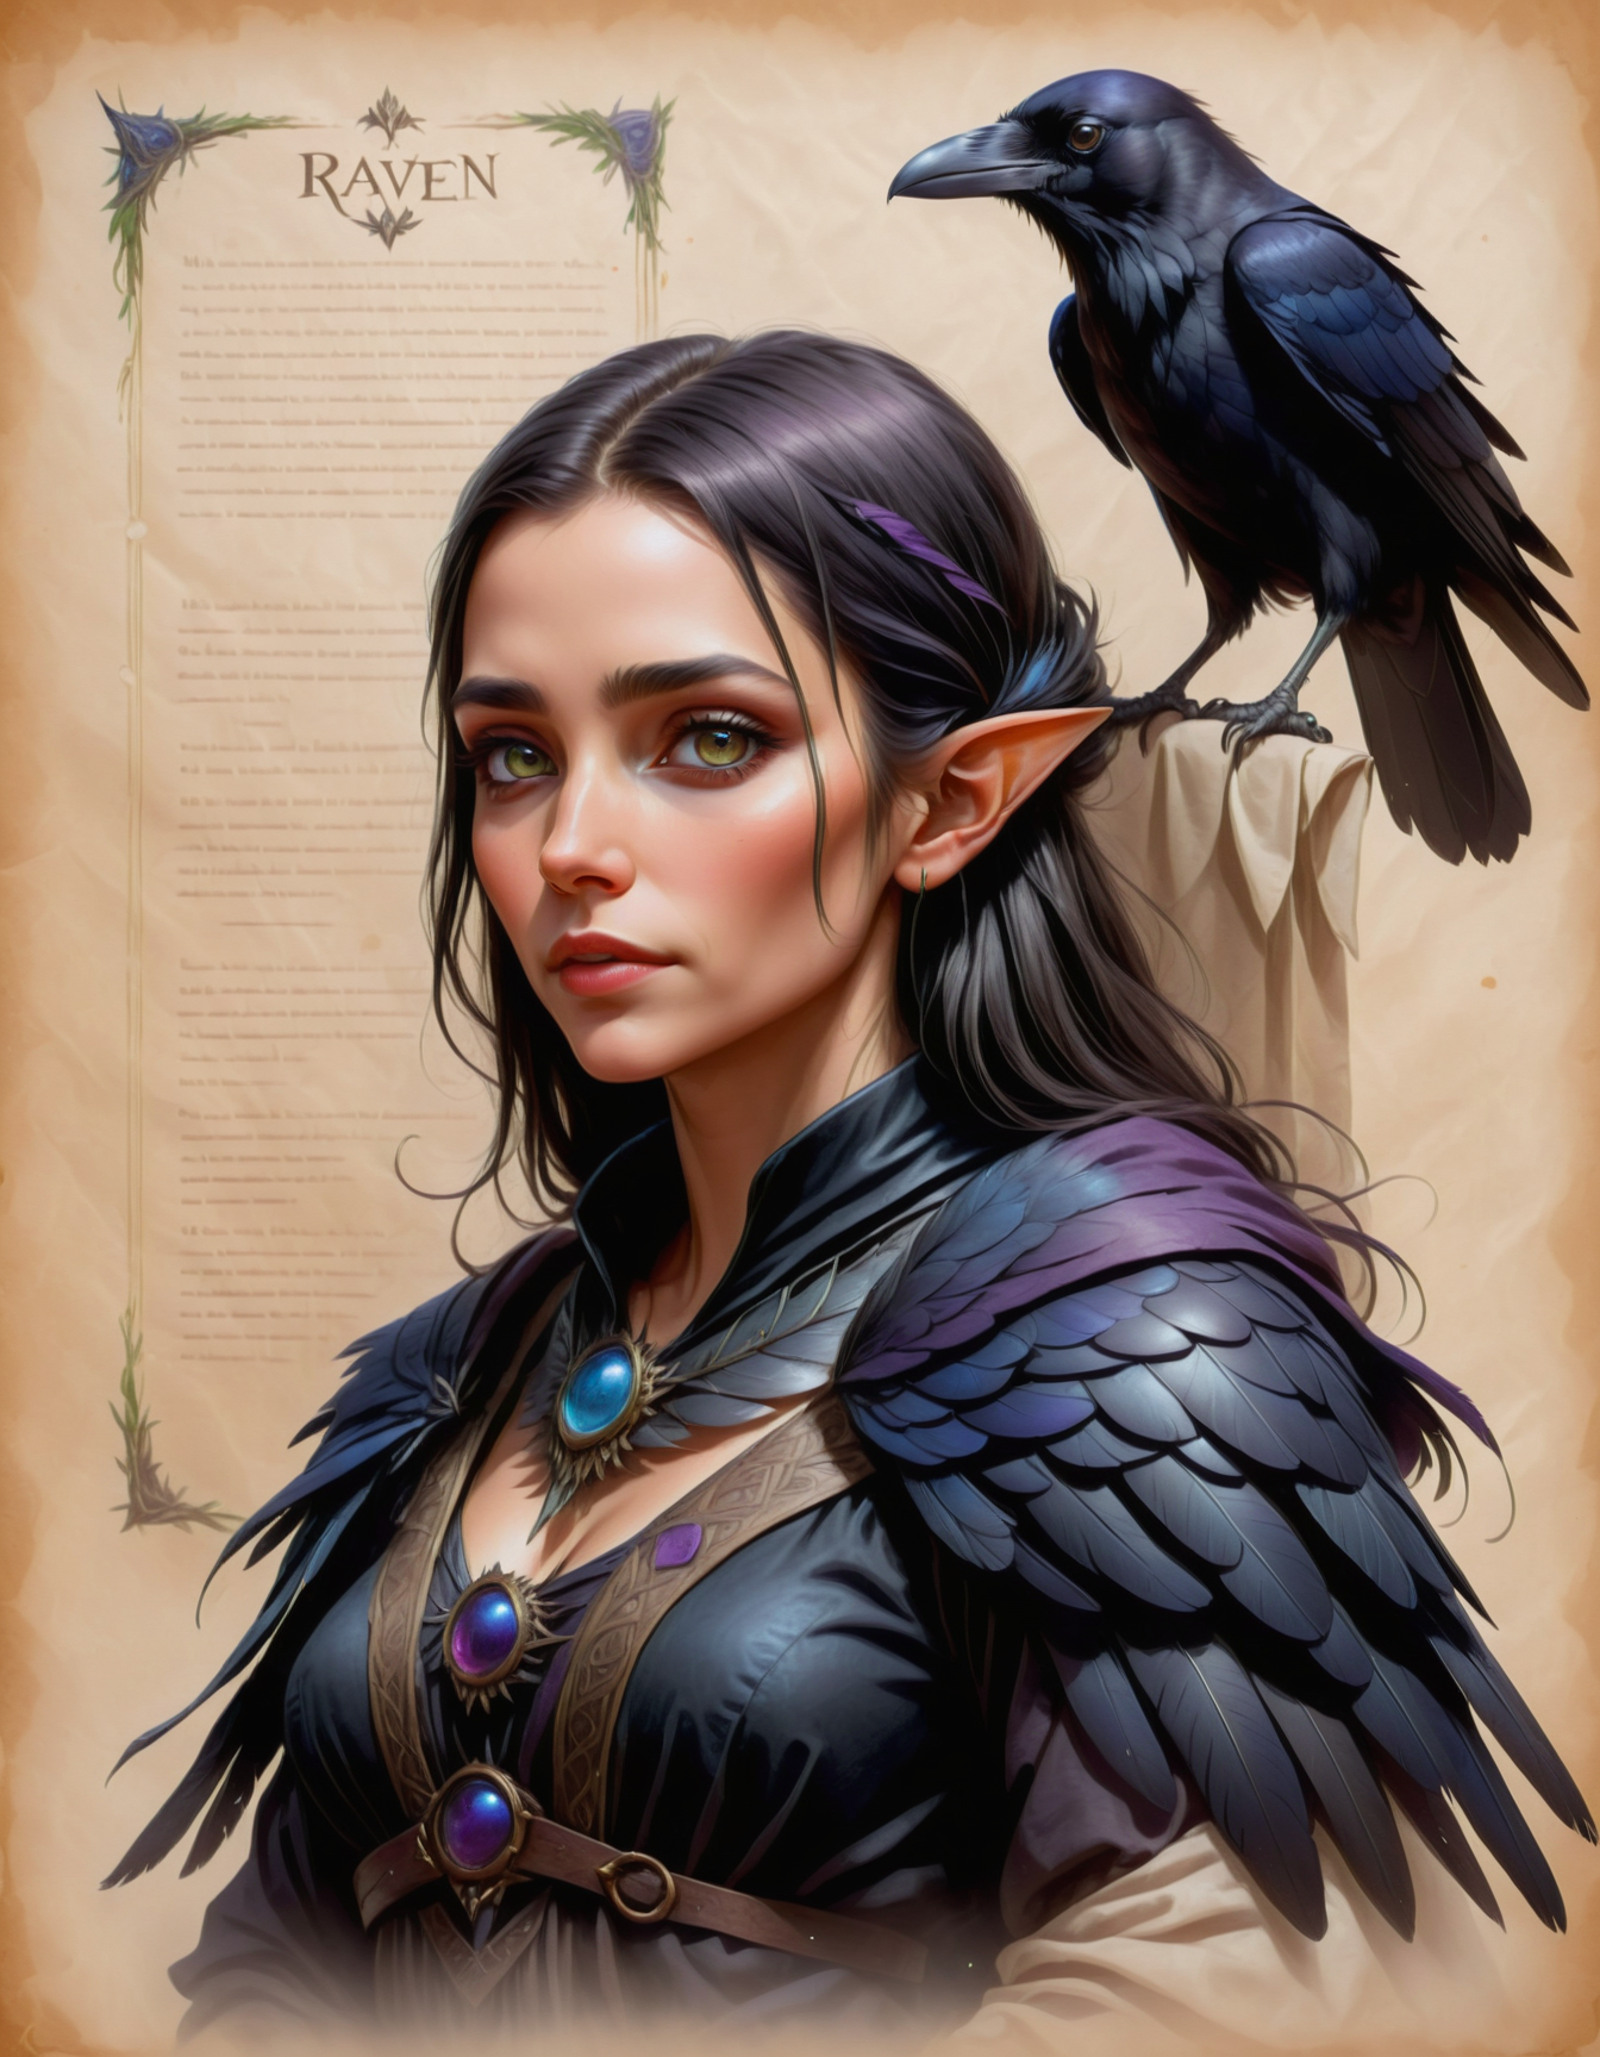 A fantasy art illustration of an elf woman with an owl on her shoulder.